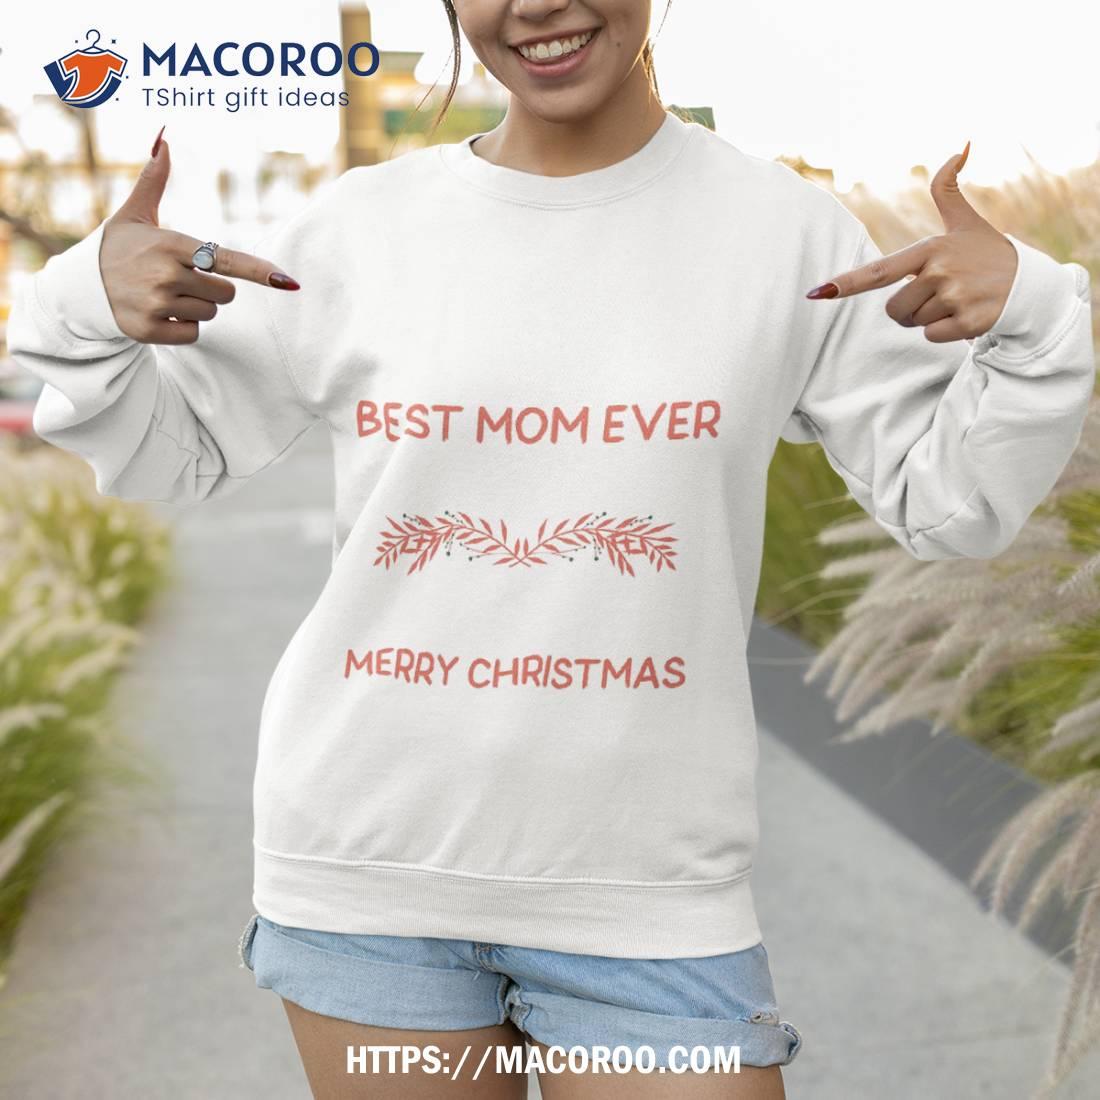 https://images.macoroo.com/wp-content/uploads/2023/08/best-mom-ever-merry-christmas-shirt-good-christmas-gifts-for-your-mom-sweatshirt-1.jpg